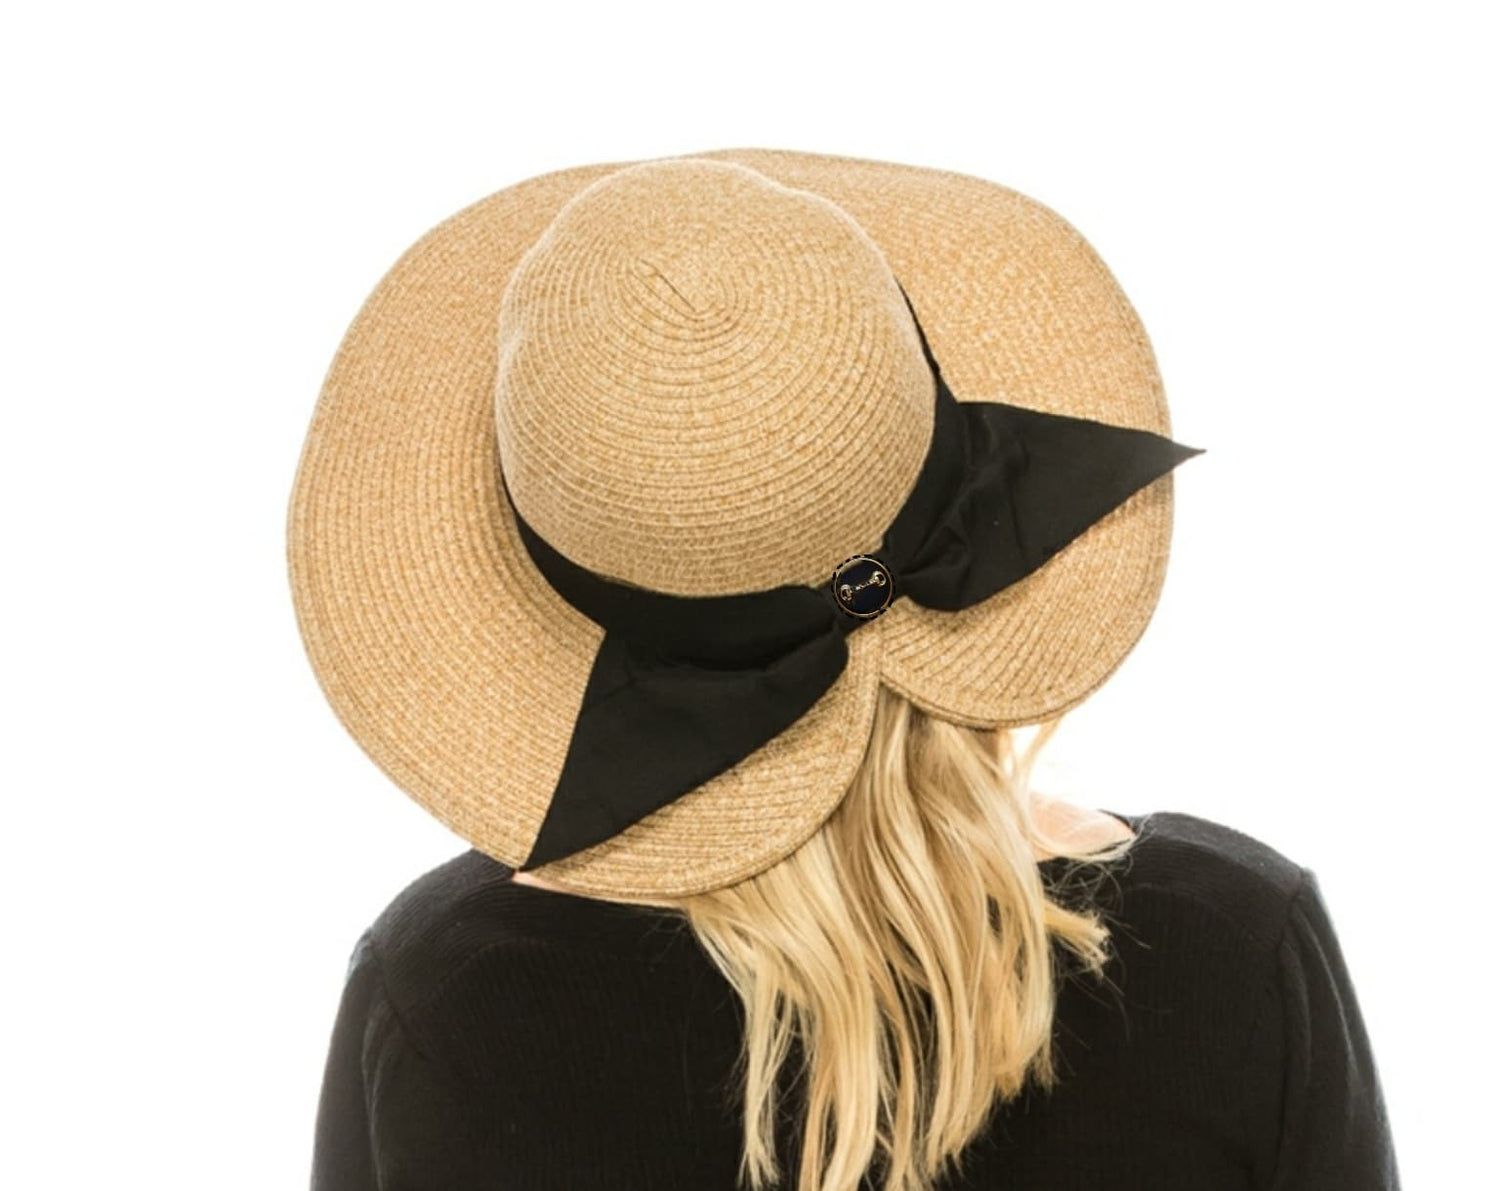 Washable and Packable Travel Sun Hat, Equestrian Hat | BaronEquestrian